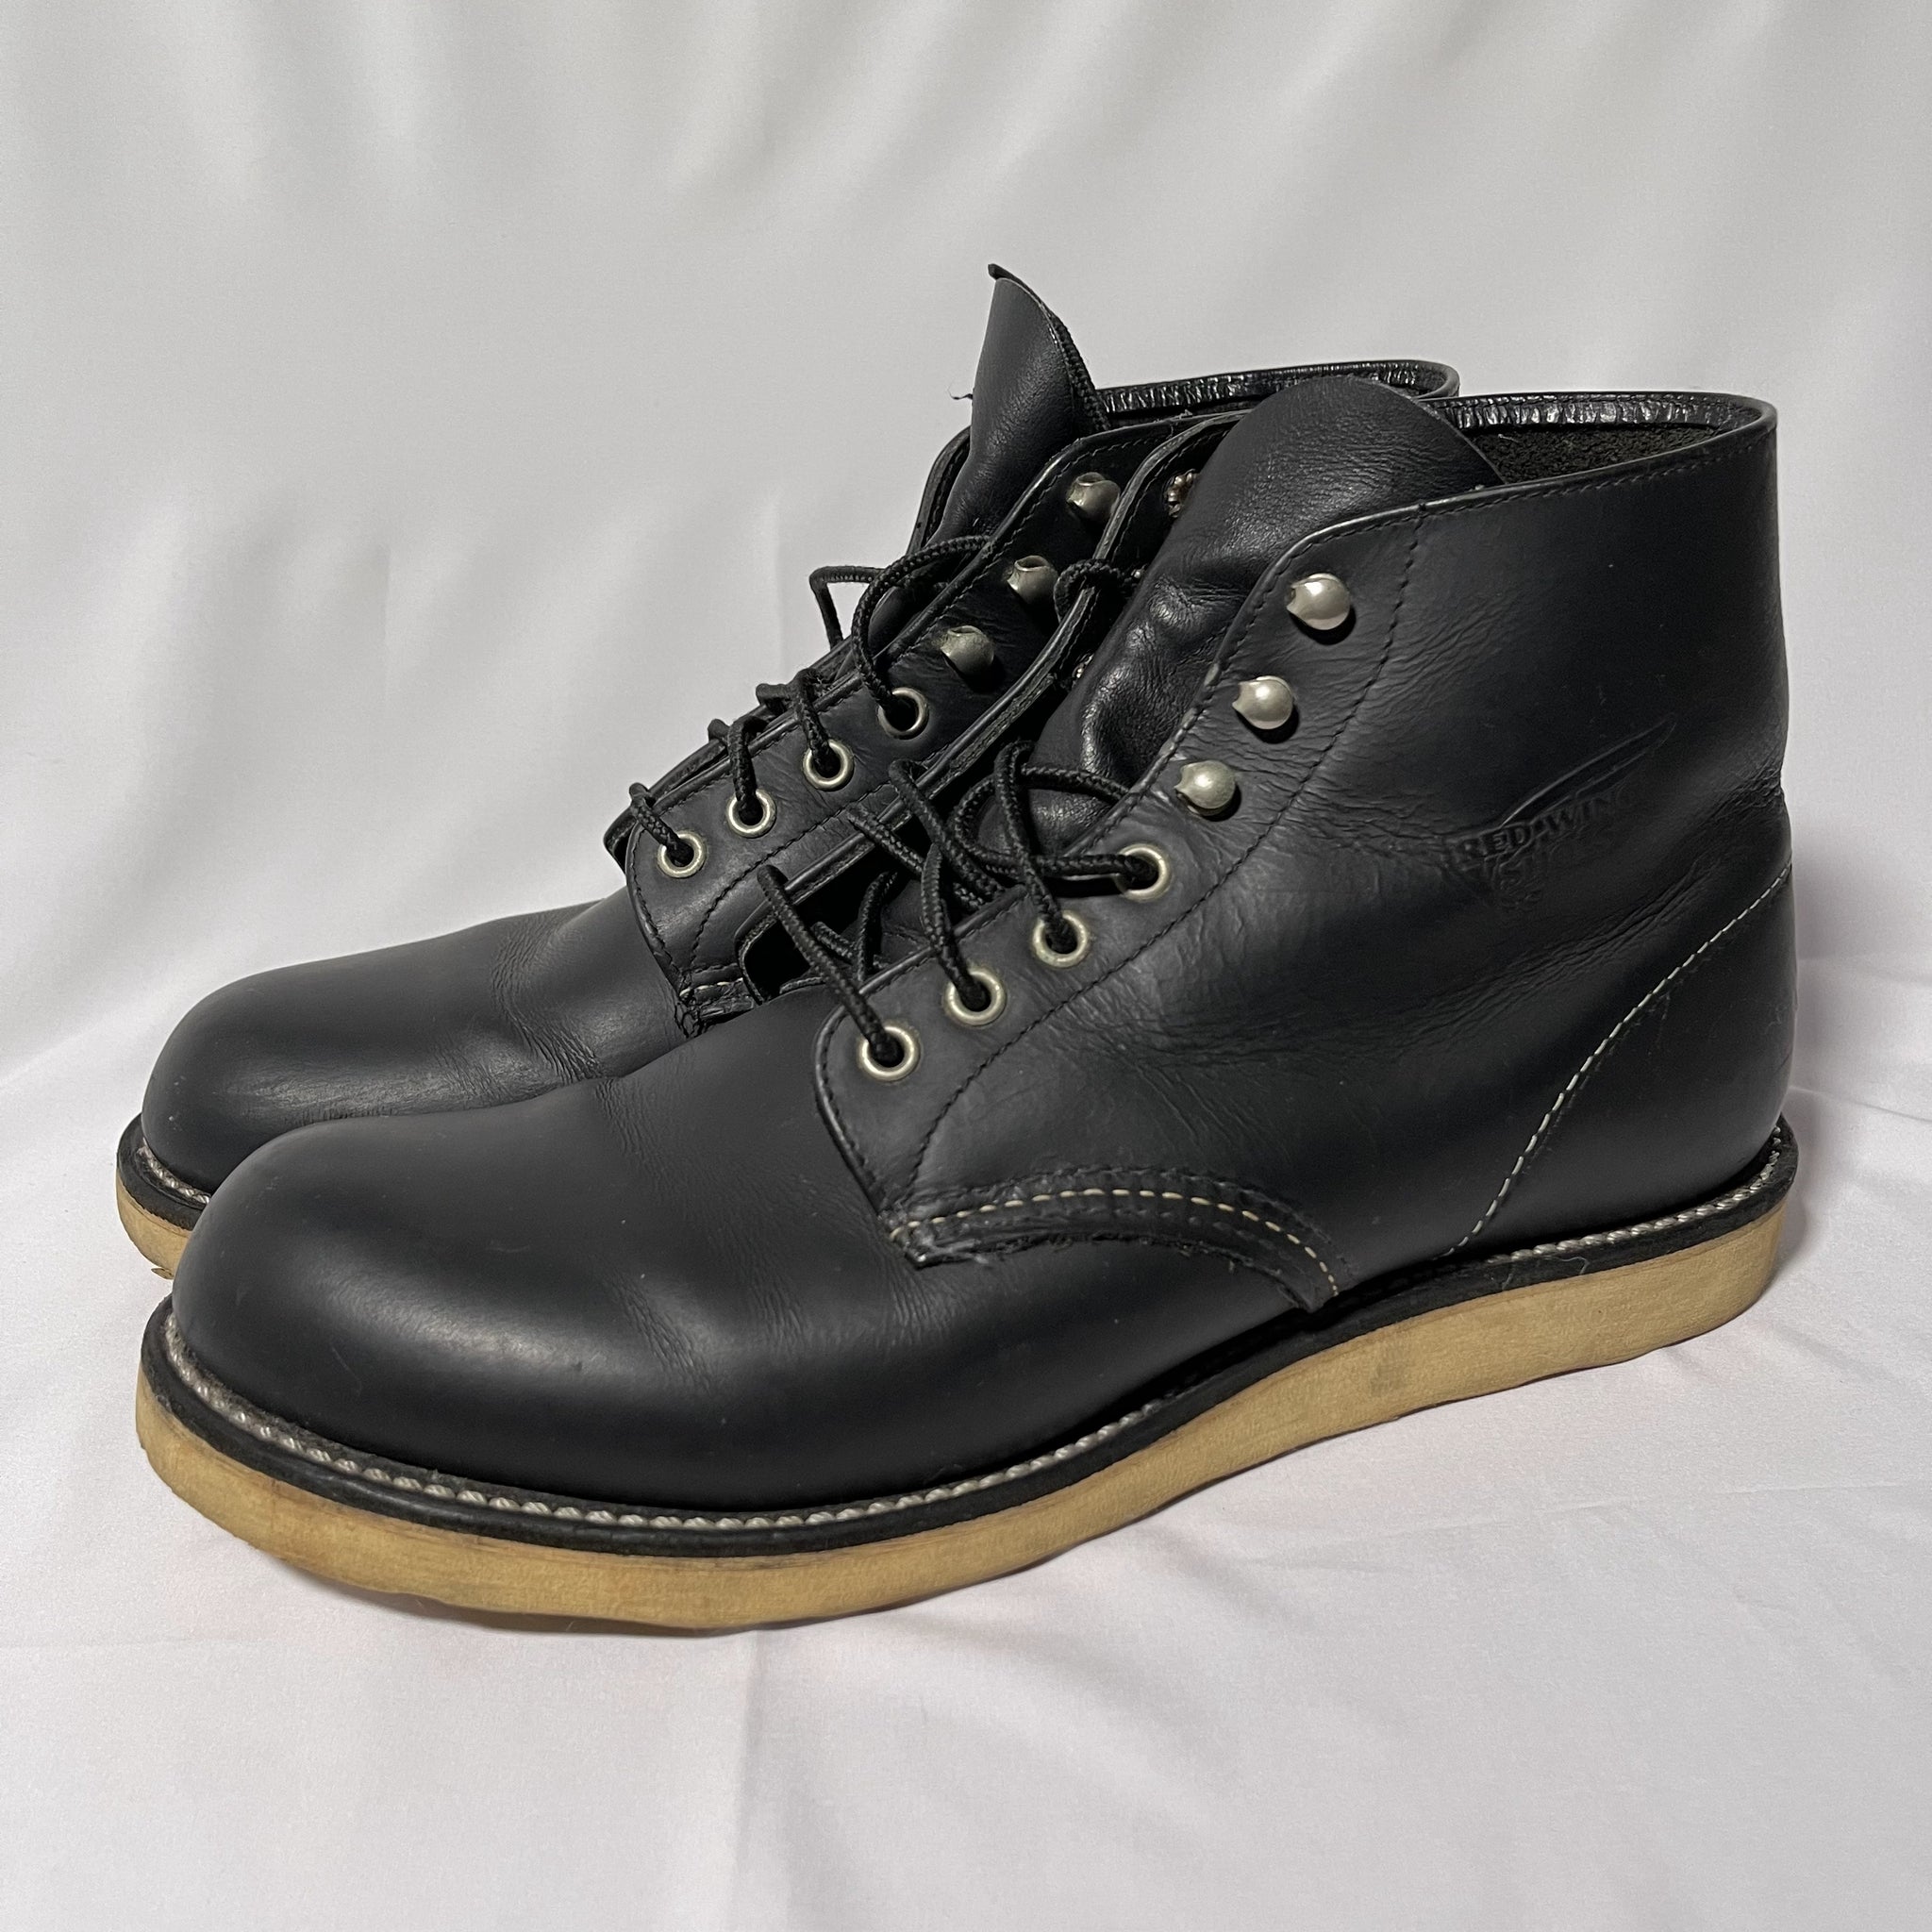 Red Wing Shoes CLASSIC ROUND STYLE NO. 8165 US 9.5 Eur 42.5 27.5cm "D" width